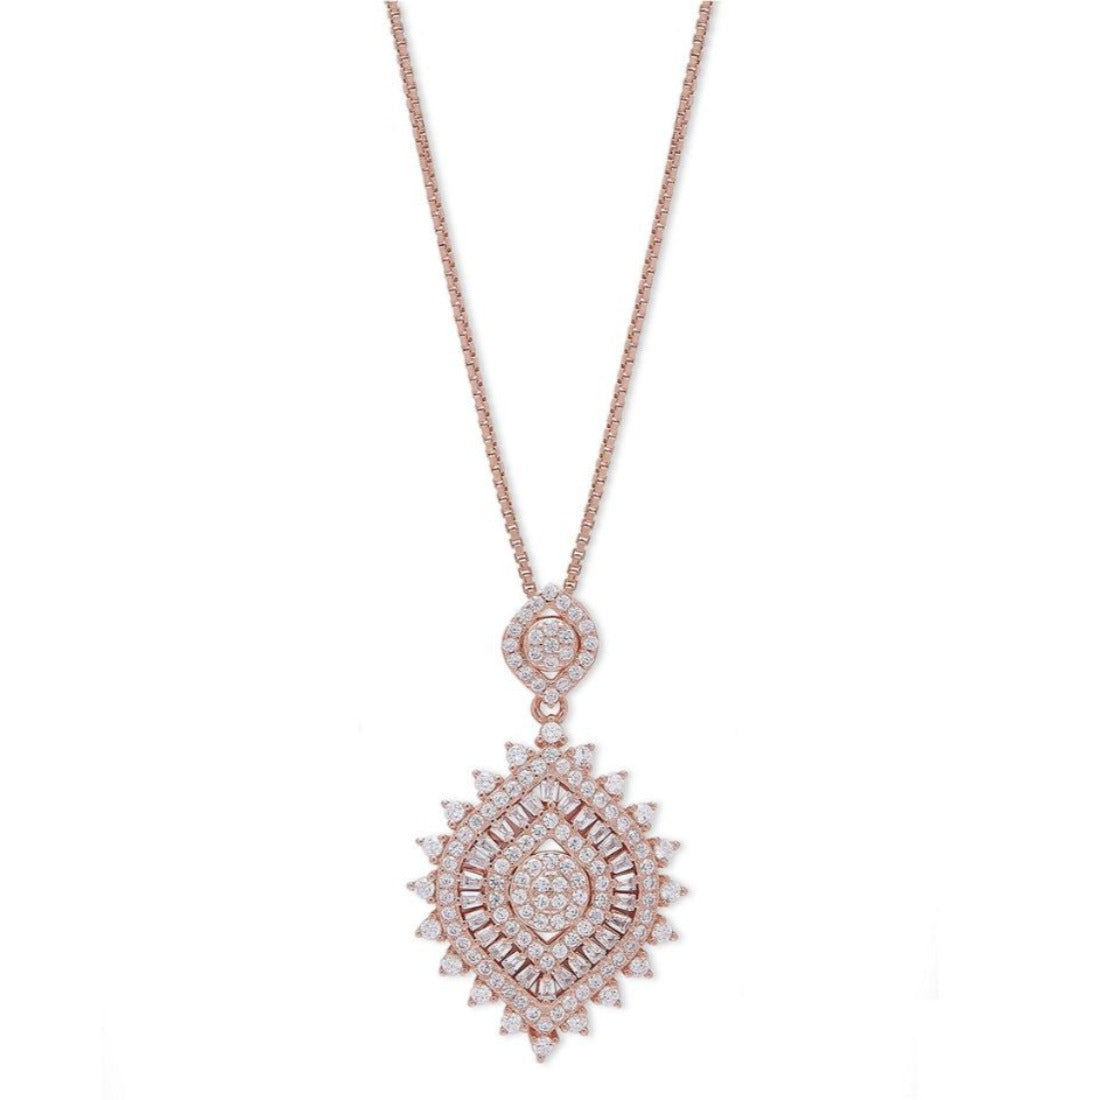 Abstract Radiance 925 Sterling Silver Rose Gold-Plated Pendant